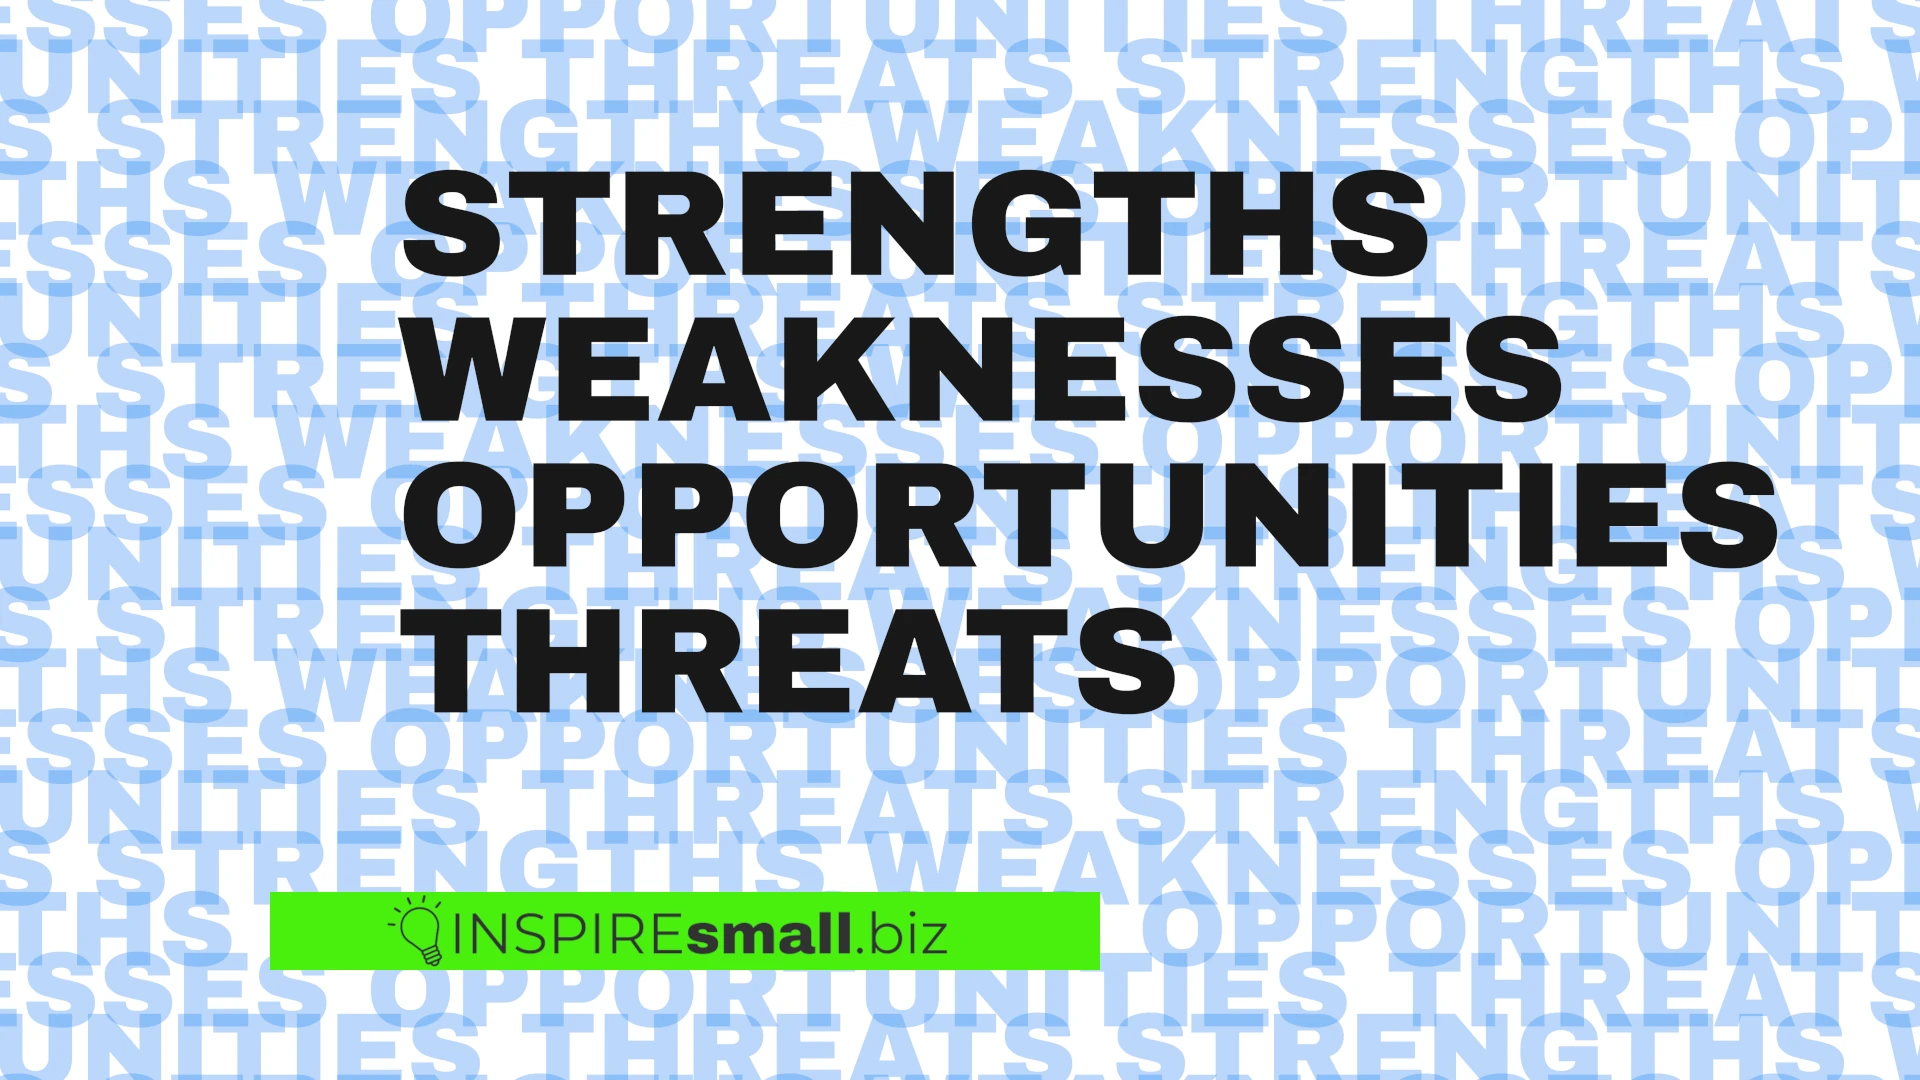 Conducting a SWOT Analysis - Strengths, Weaknesses, Opportunities, and Threats Analysis from INSPIREsmall.biz